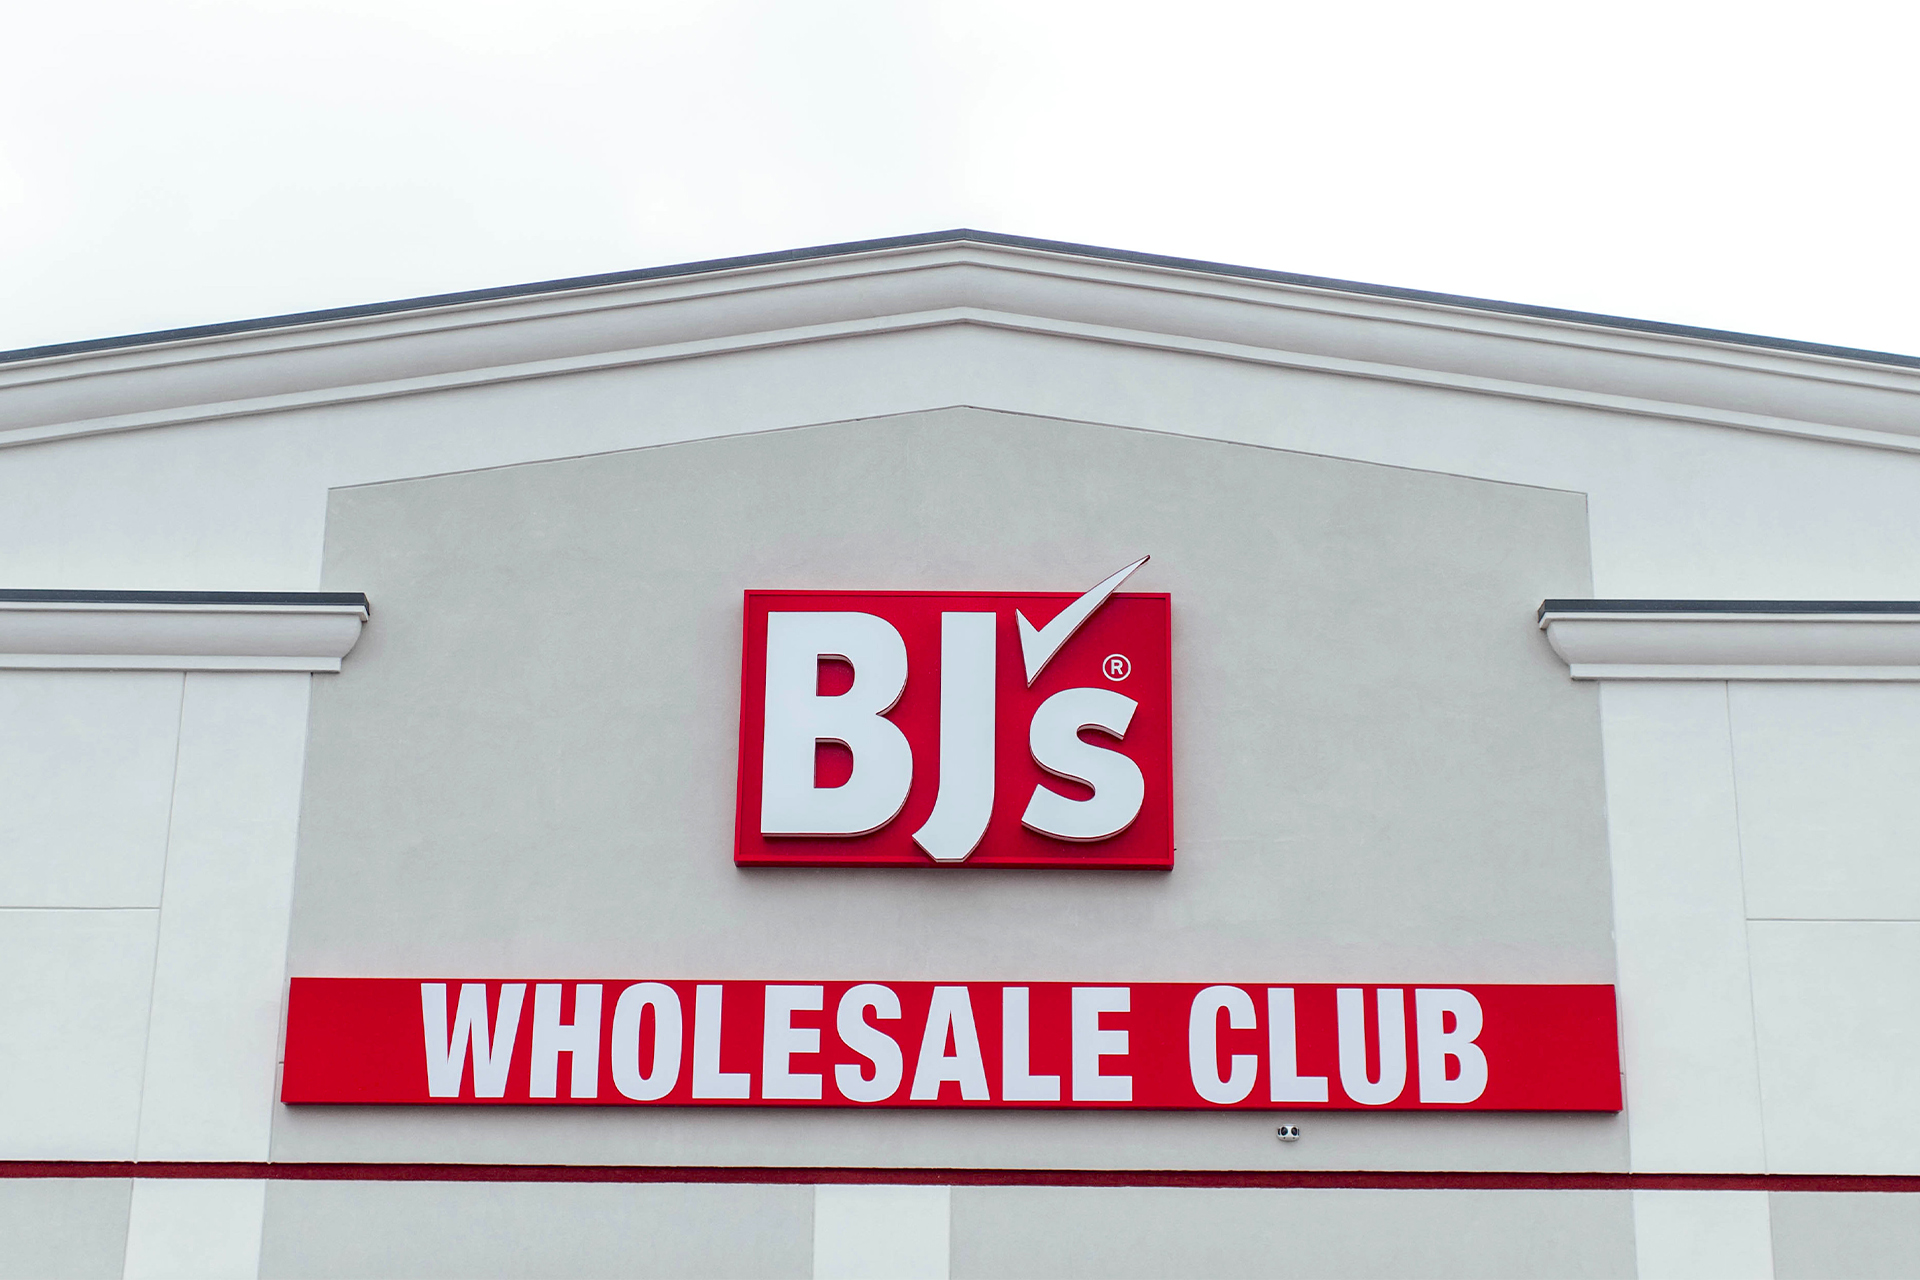 BJ's Wholesale Club set to open two new Midwest locations and looking to  add more